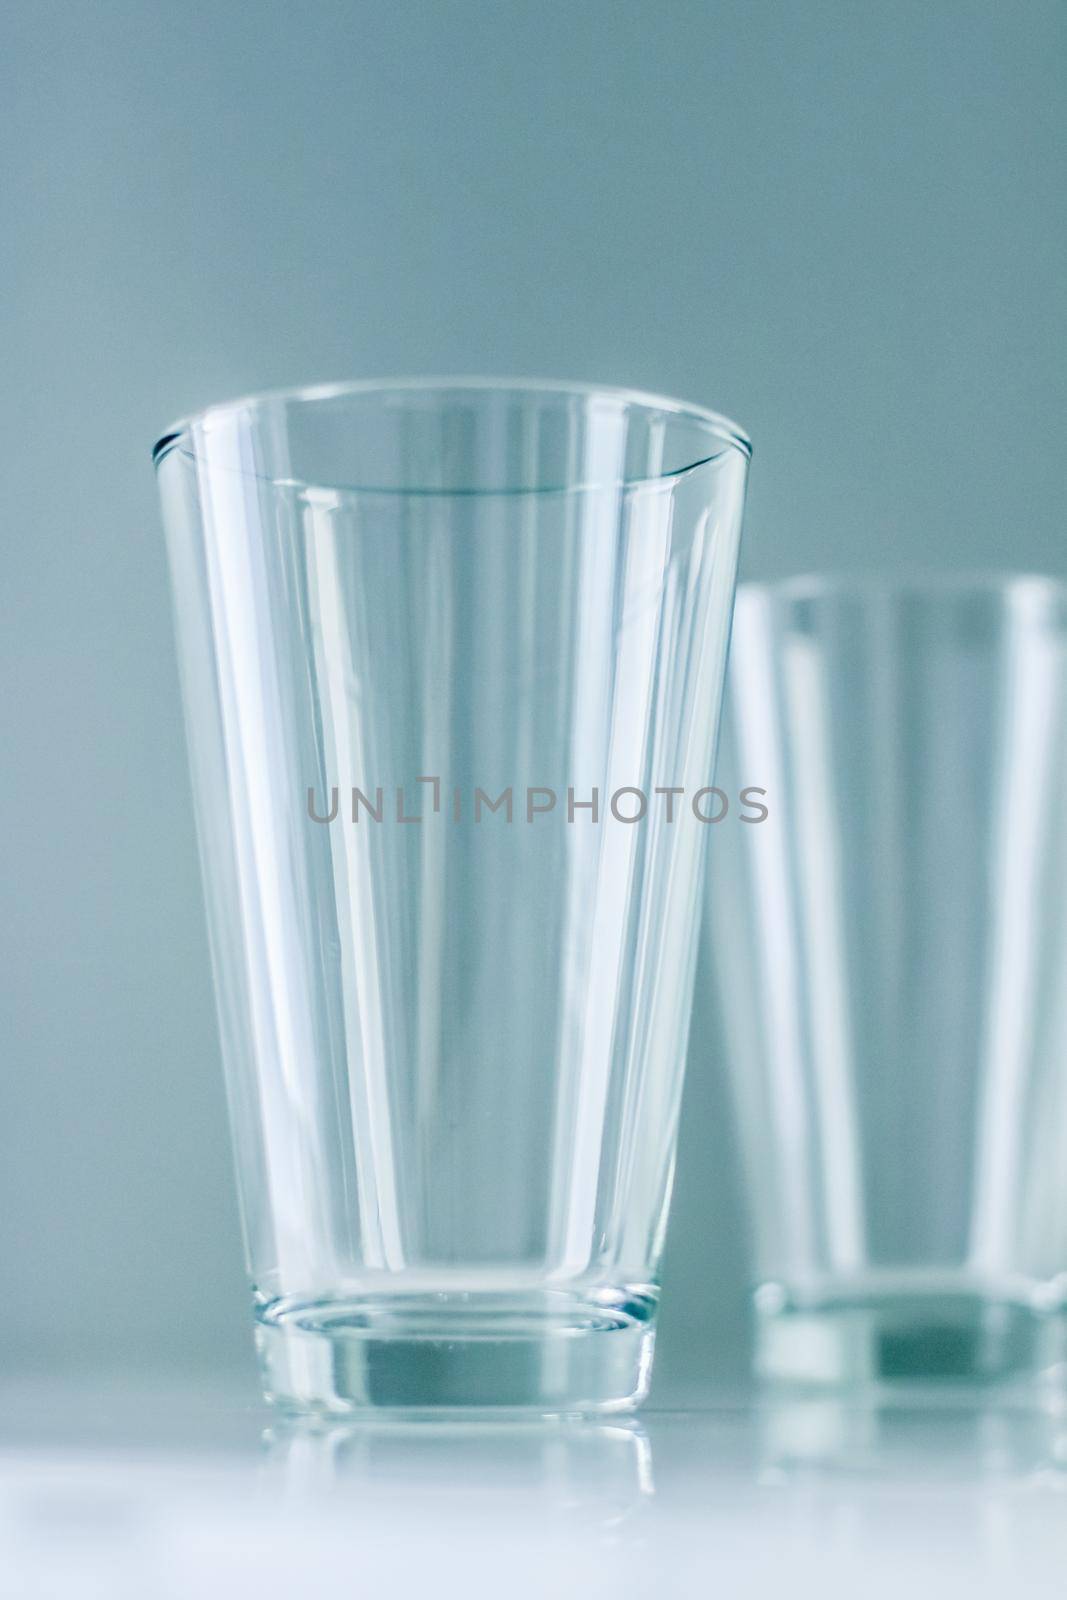 Glassware, washing and purity concept - Clean empty glasses on marble table